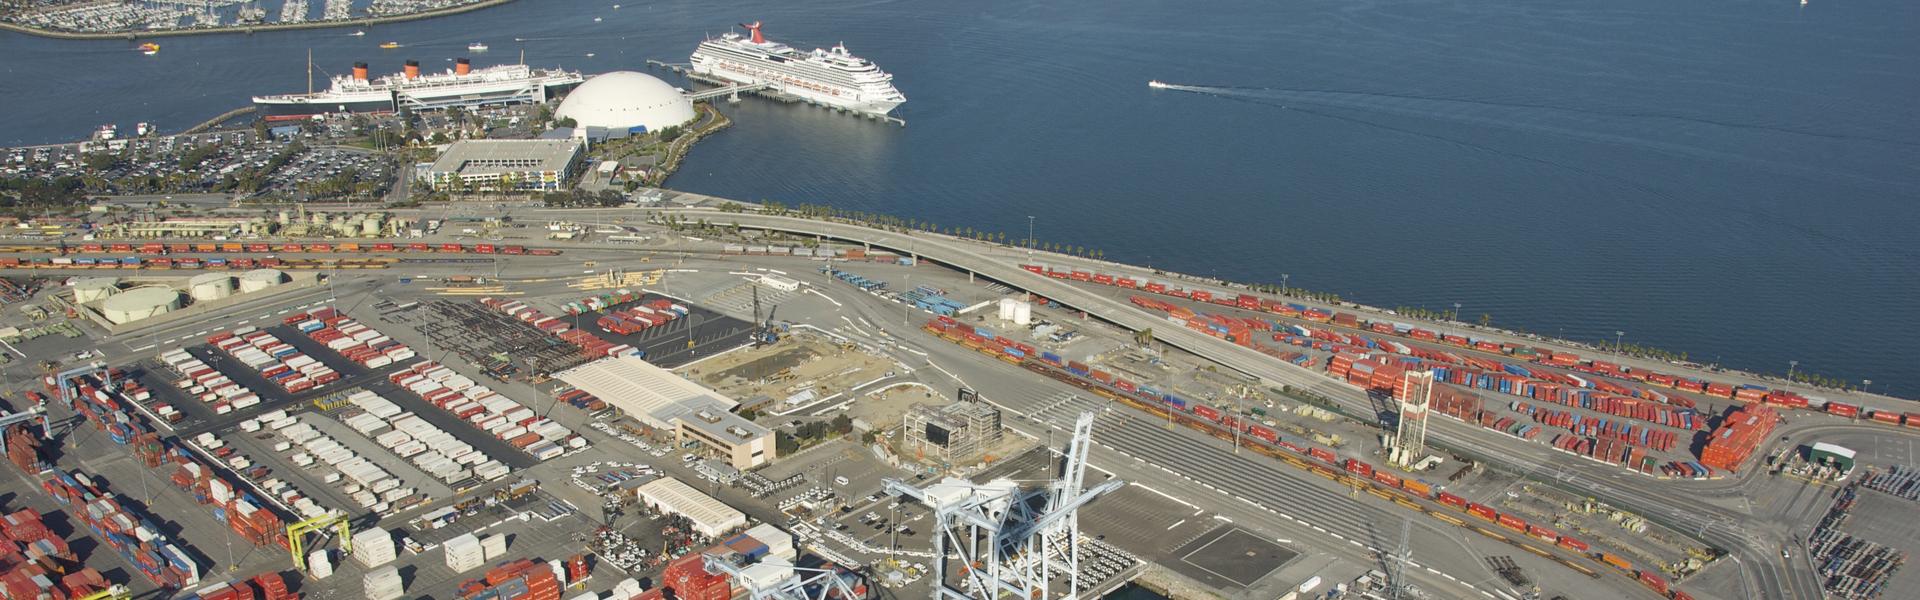 Aerial shot of the Port of Long Beach.